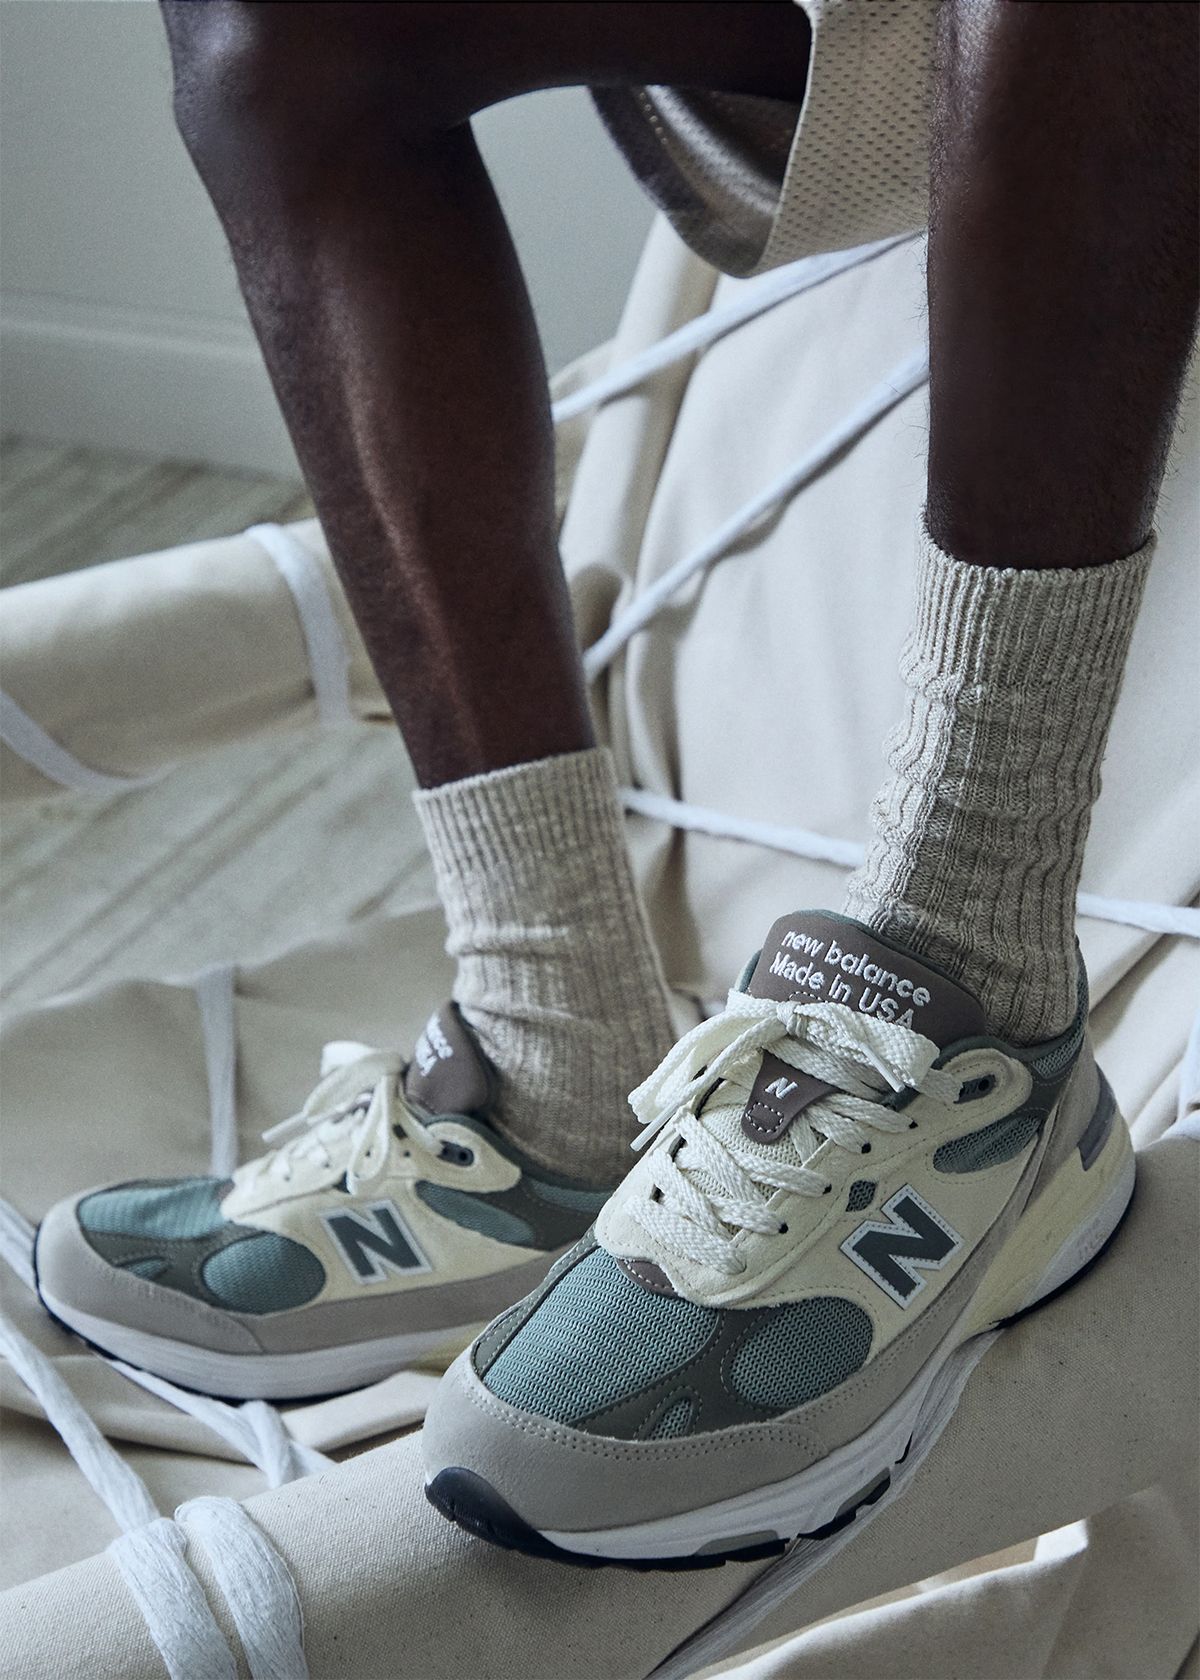 Kith's Spring 101 Collection Features an Exclusive New Balance 993